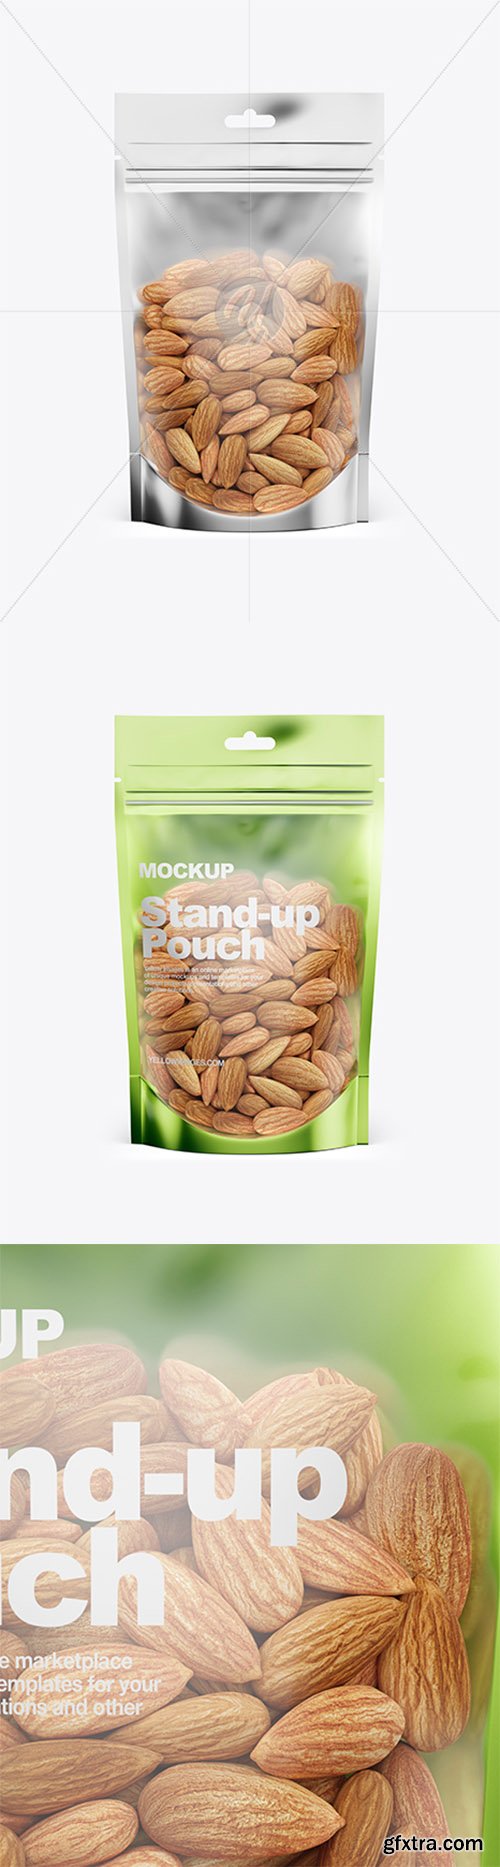 Glossy Transparent Stand-Up Pouch W/ Almond Nuts Mockup - Front View 33048